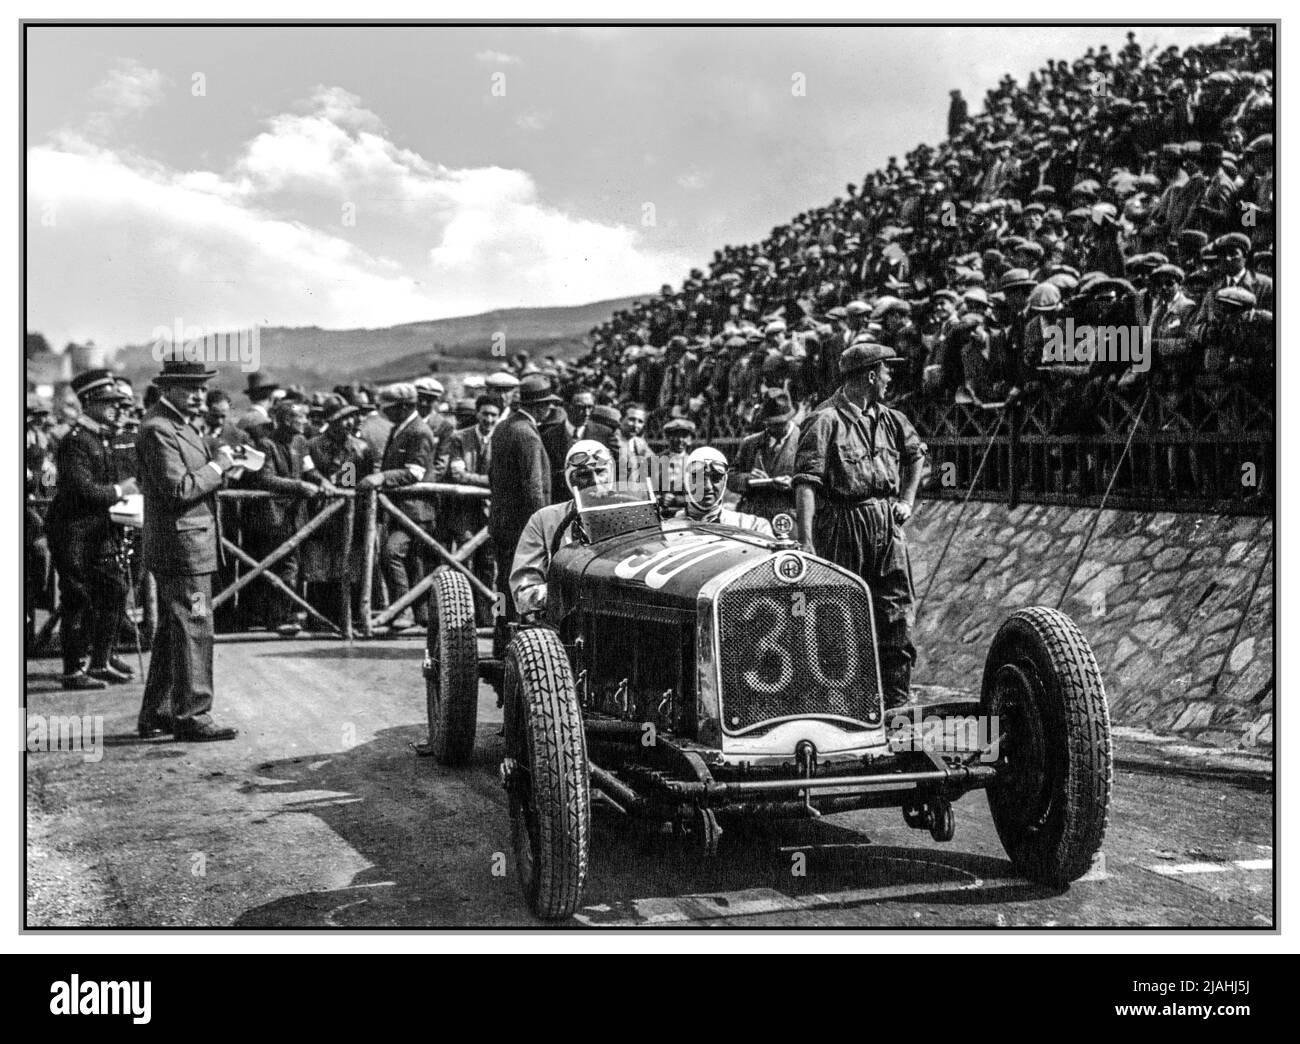 TARGA FLORIO Achille Varzi in his winning Alfa Romeo P2 at the 1930 Targa Florio. The 1930 Targa Florio was a non-championship Grand Prix motor race held on a 67 mile (108 km) course made up of public roads on the mountainous Italian island of Sicily. May 1930 The winner Achille Varzi in his Alfa Romeo P2 number 30 Stock Photo